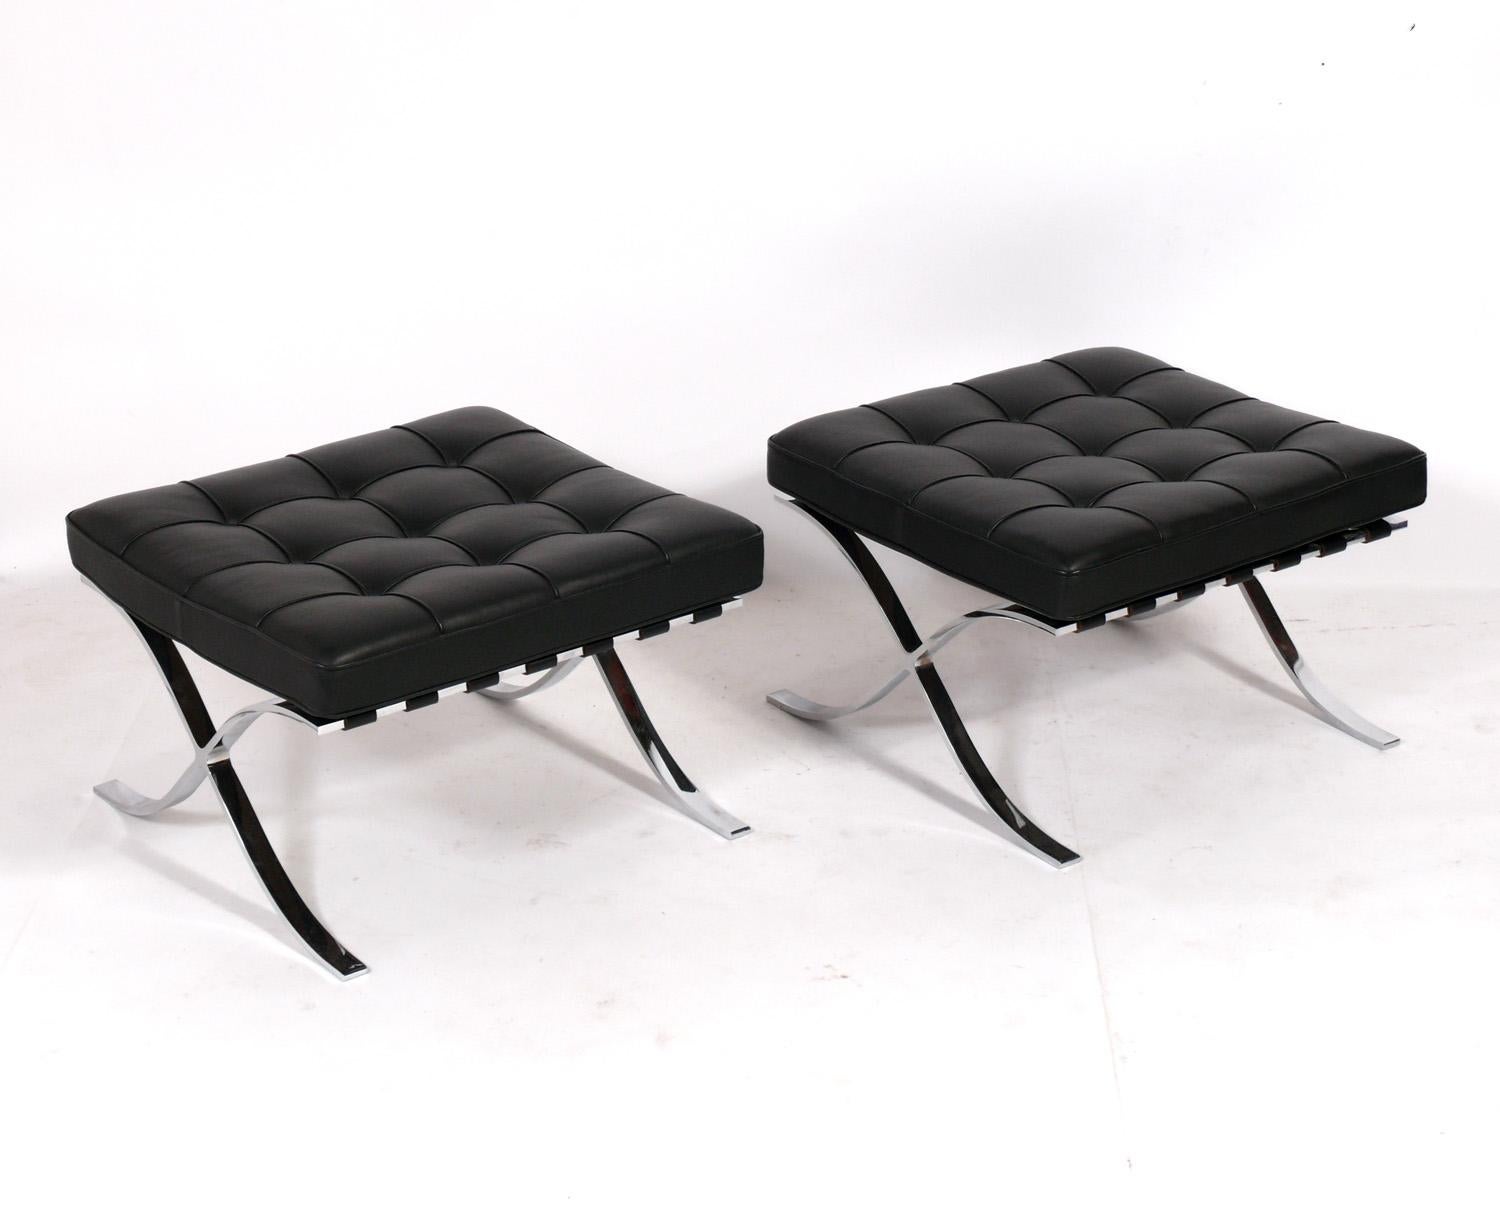 Iconic Pair of Barcelona stools or ottomans, designed by Mies van der Rohe for Knoll, American, circa 2000s. Retains Knoll tag underneath. They have been cleaned and a leather conditioner applied. Why pay $3000 or more for each new?.